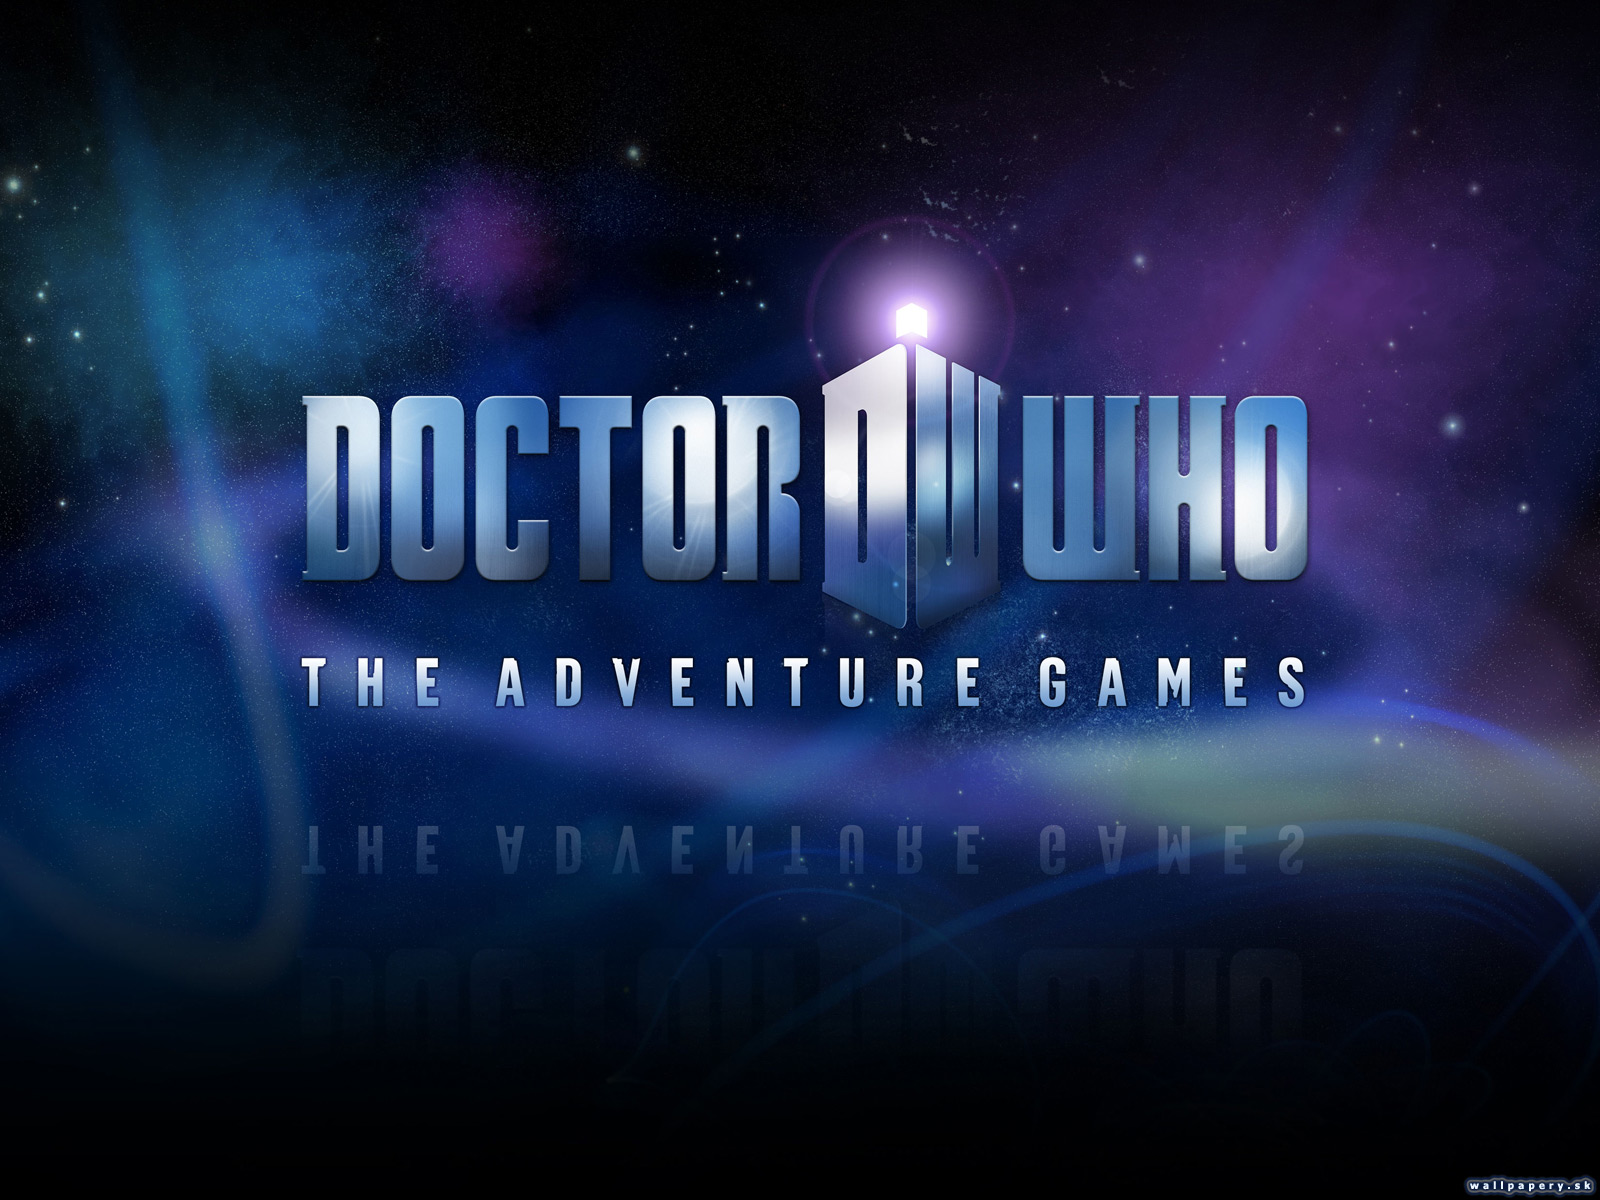 Doctor Who: The Adventure Games - Blood of the Cybermen - wallpaper 12